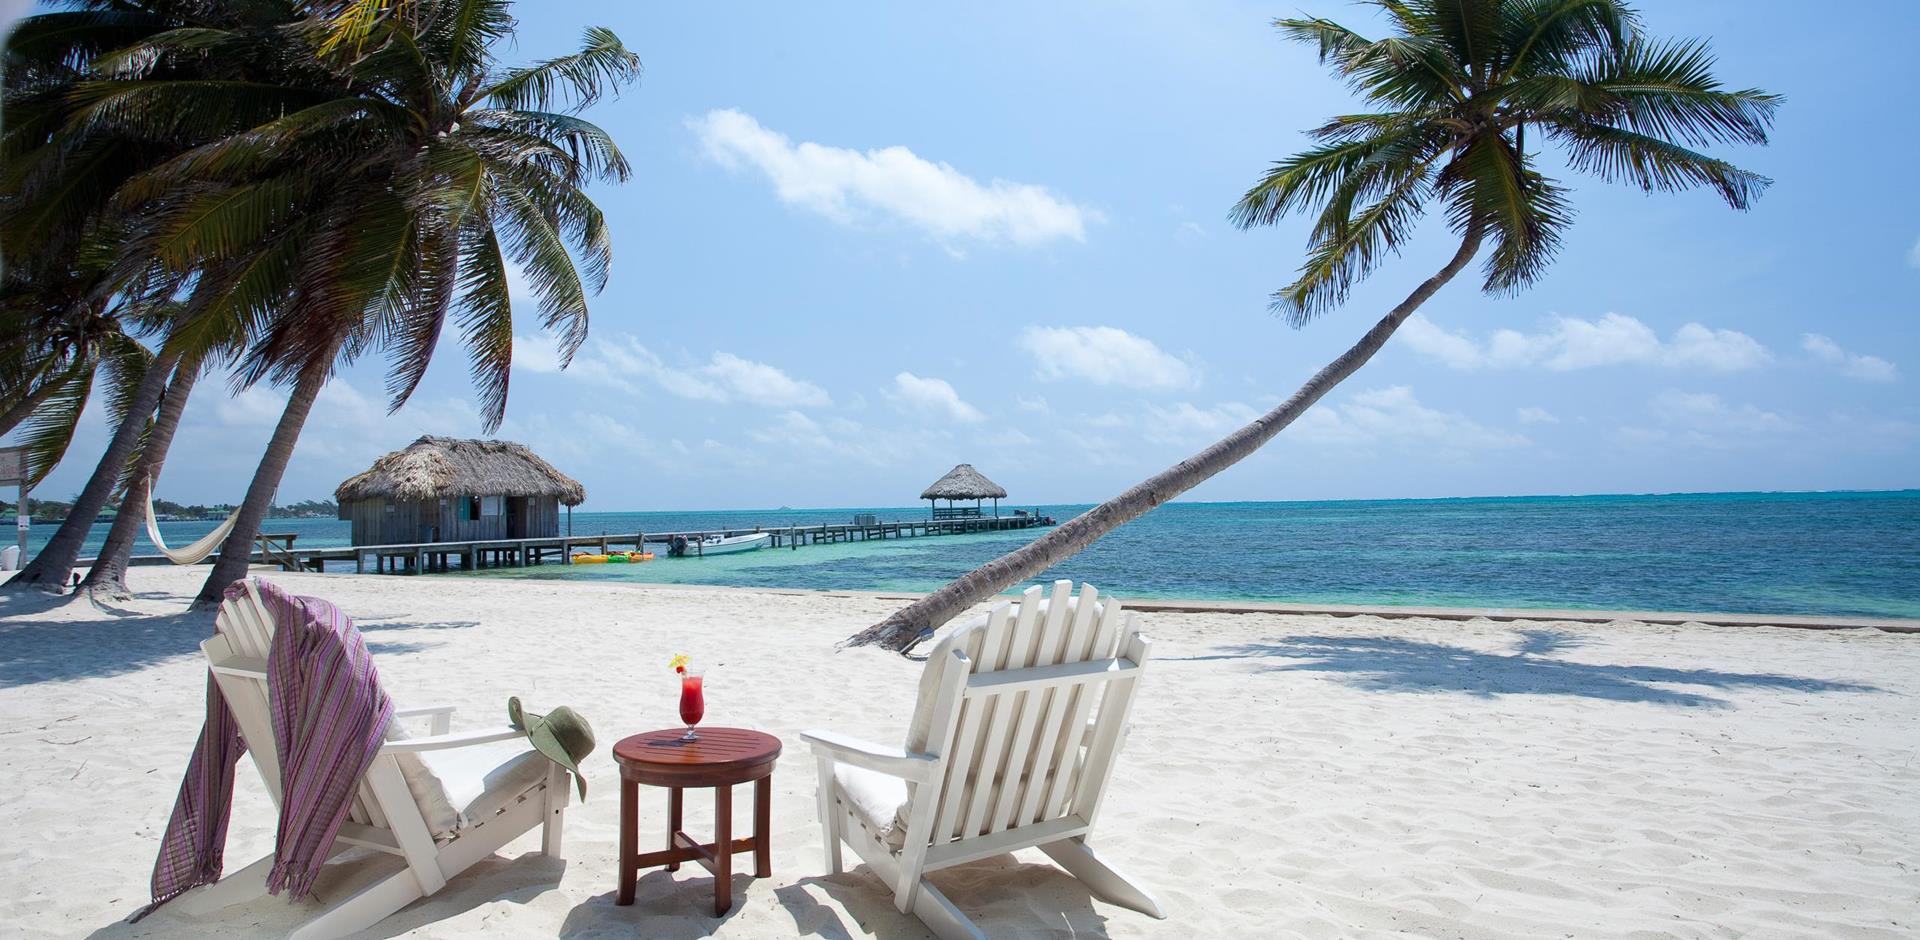 Seating on white sand beach amongst palm trees, Victoria House Resort & Spa, The Cayes, Belize, Central America